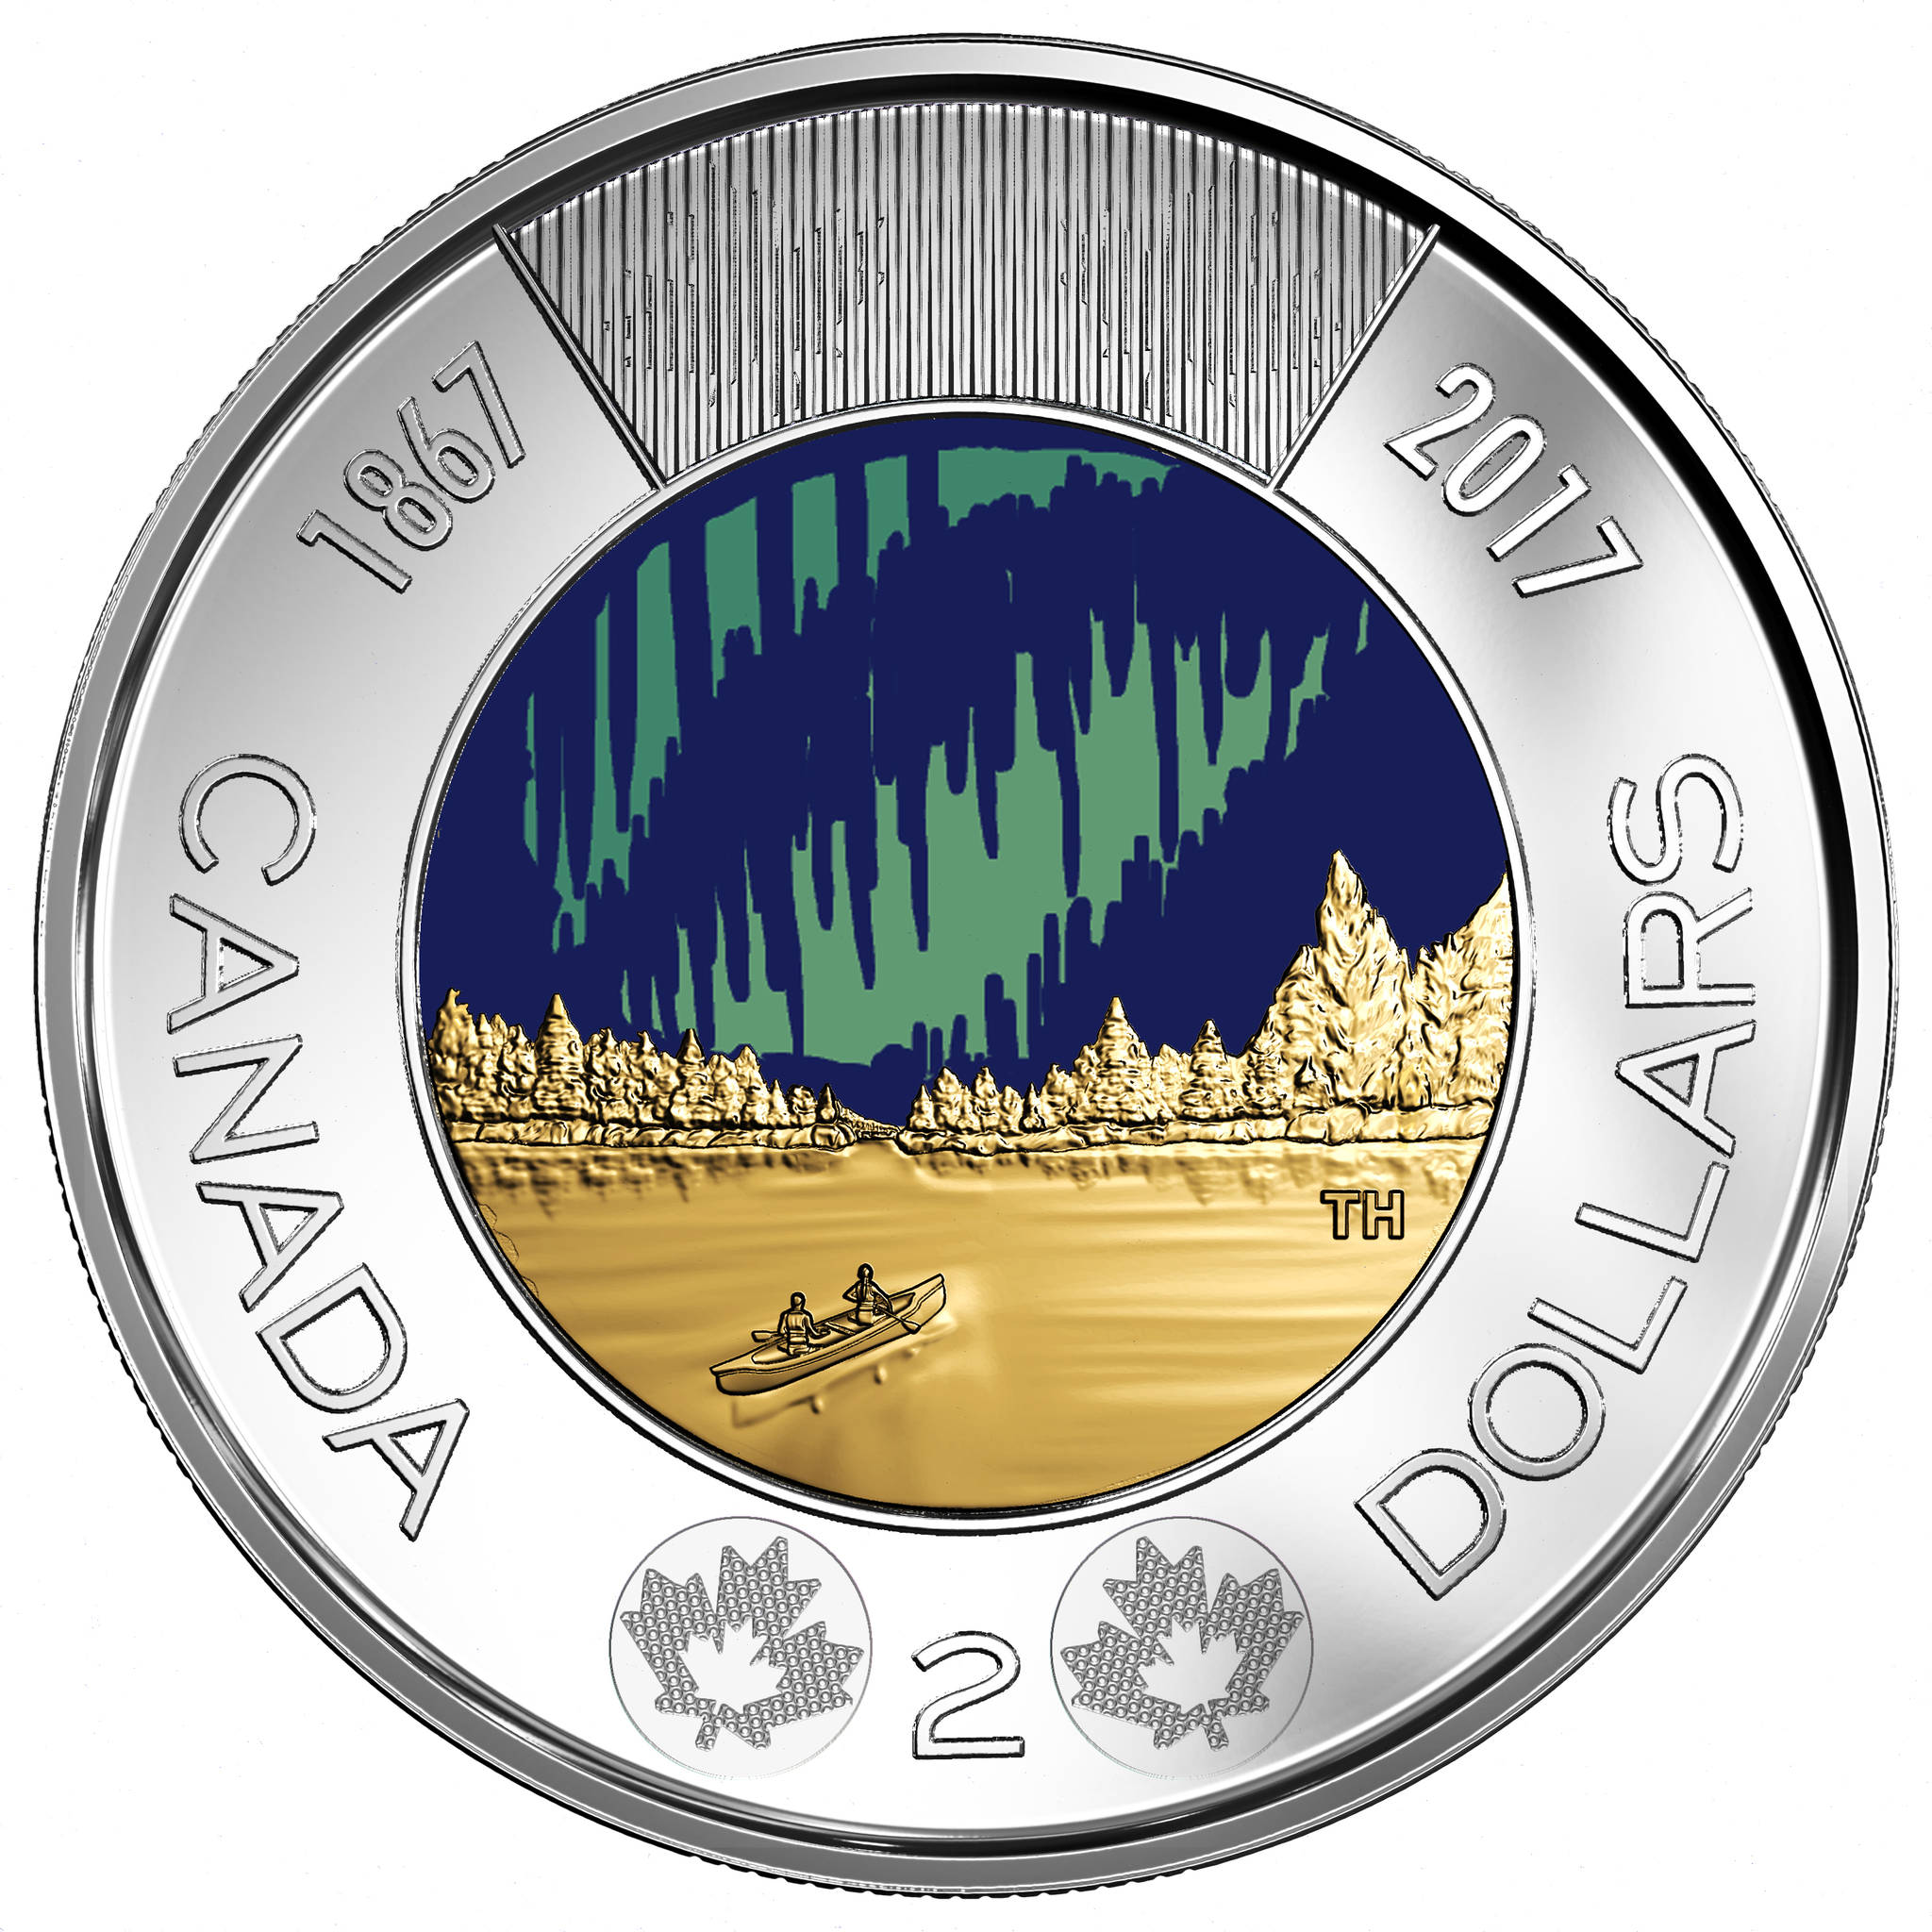 VIDEO: B.C.-made glow-in-the-dark toonie coming for Canada 150